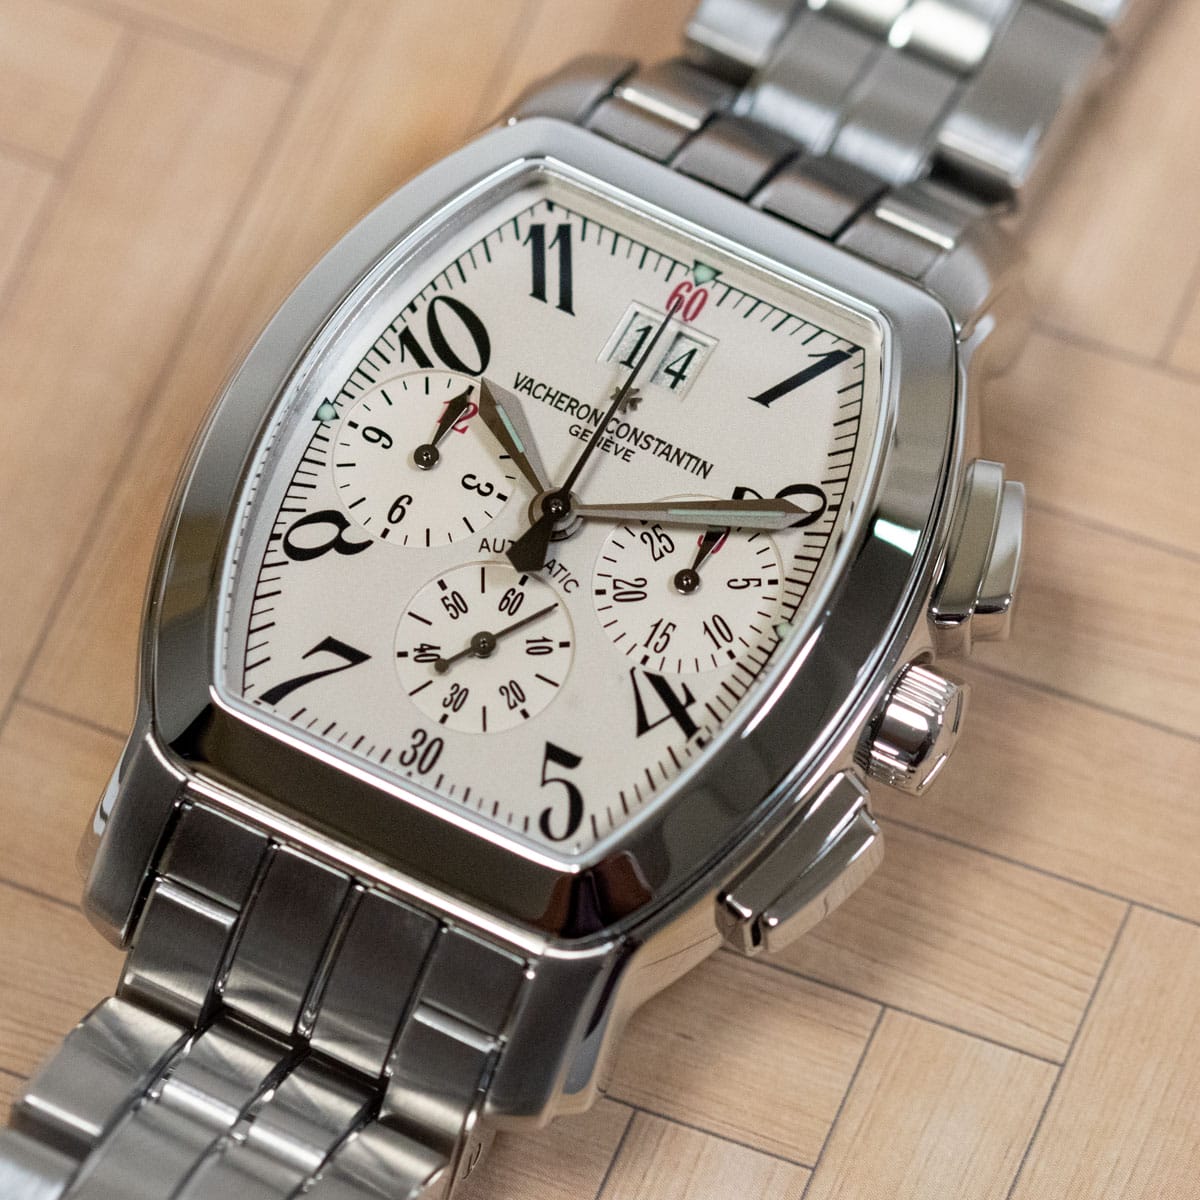 Stylied photo of  of Royal Eagle Chronograph